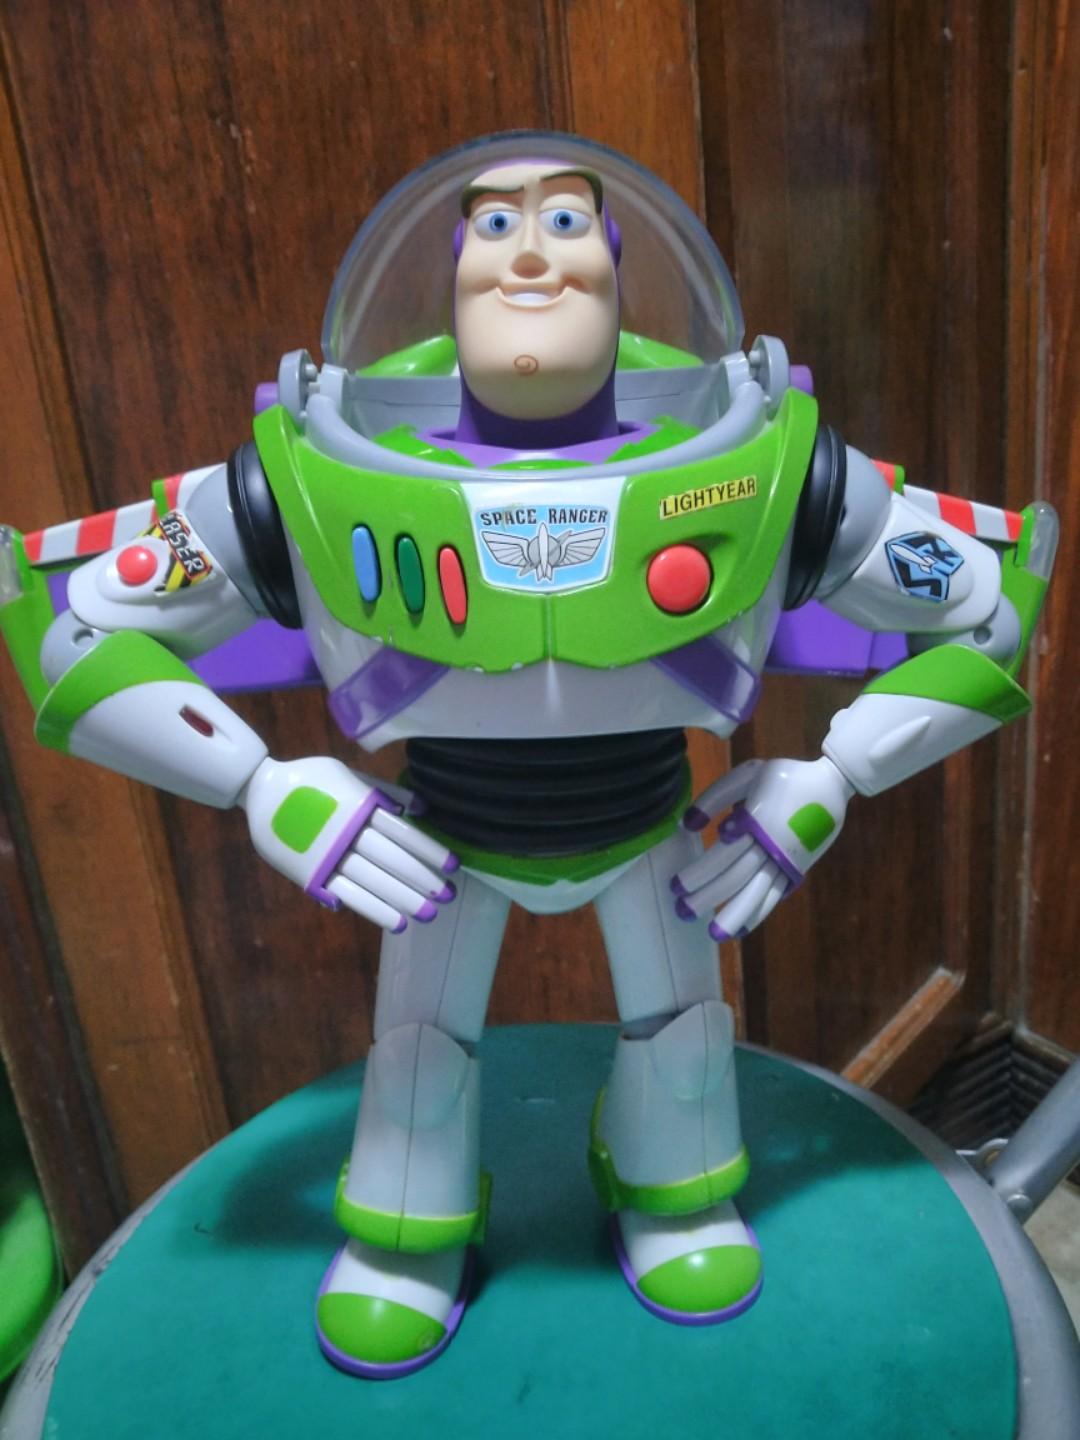 buzz lightyear collection